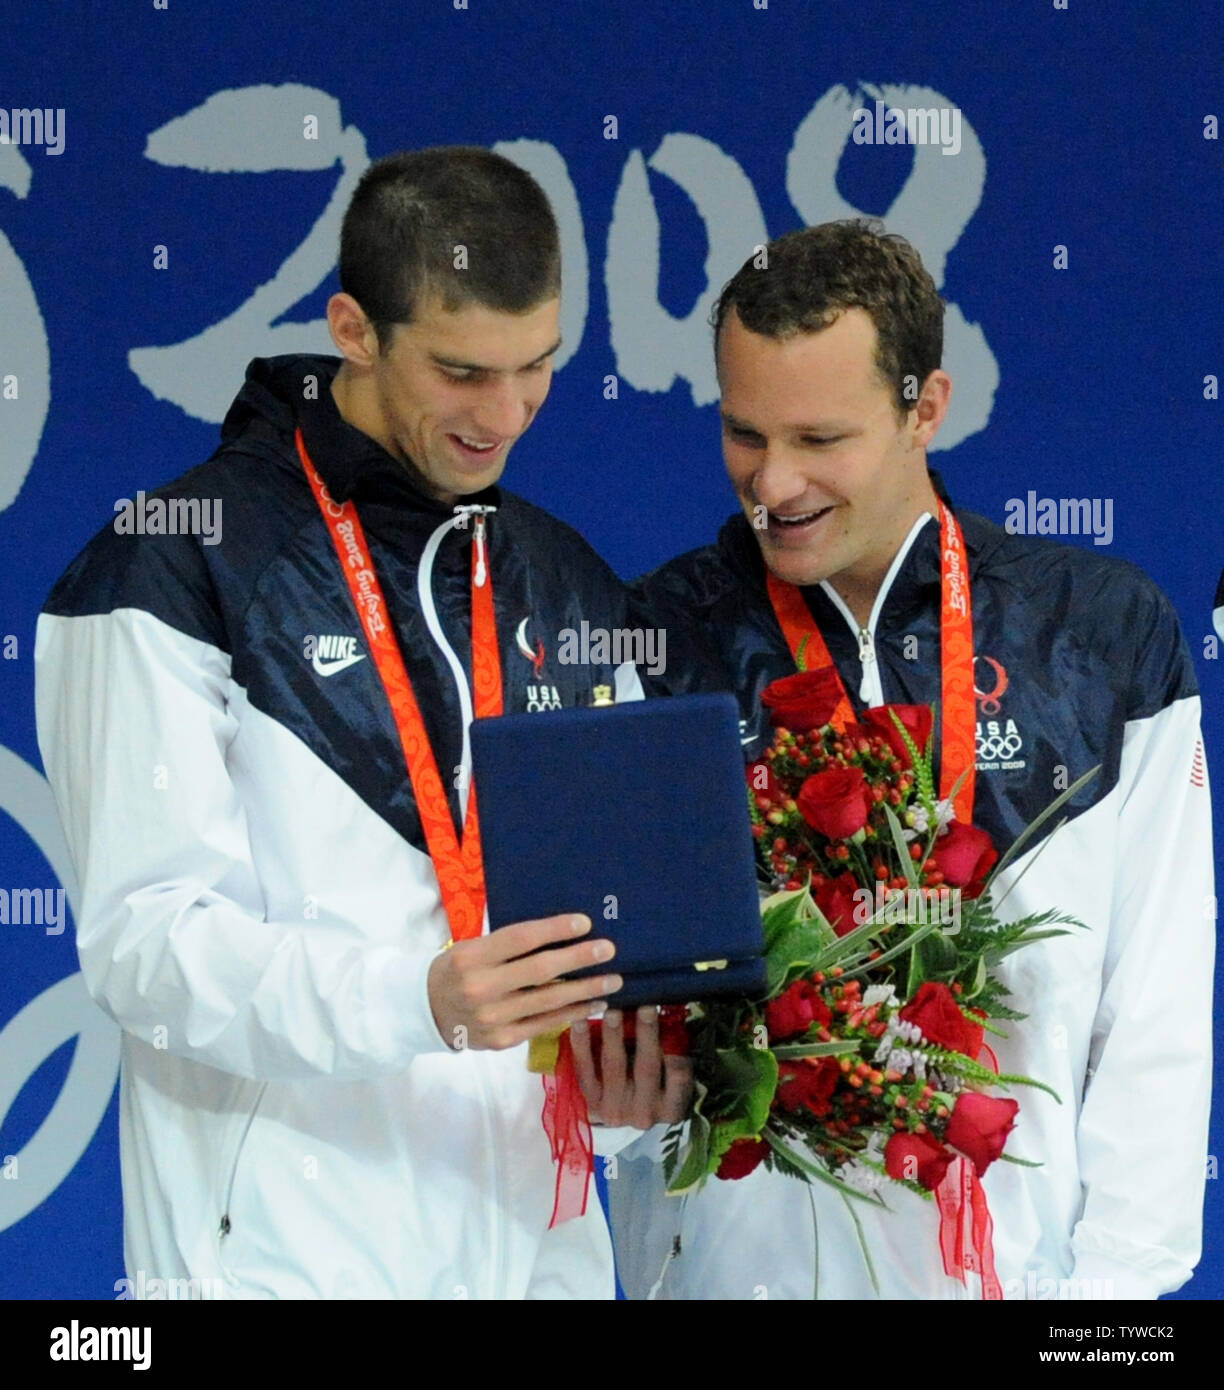 USA's Michael Phelps (L) looks at the special award to acknowledge that he set a new single Olympic record of eight gold medals with teammate Brendan Hansen during the awards ceremony for the Men's 4x100M Medley Relay event at the National Aquatics Center at the Summer Olympics in Beijing on August 17, 2008.   The USA team set a World Record of 3:29.34.     (UPI Photo/Pat Benic) Stock Photo